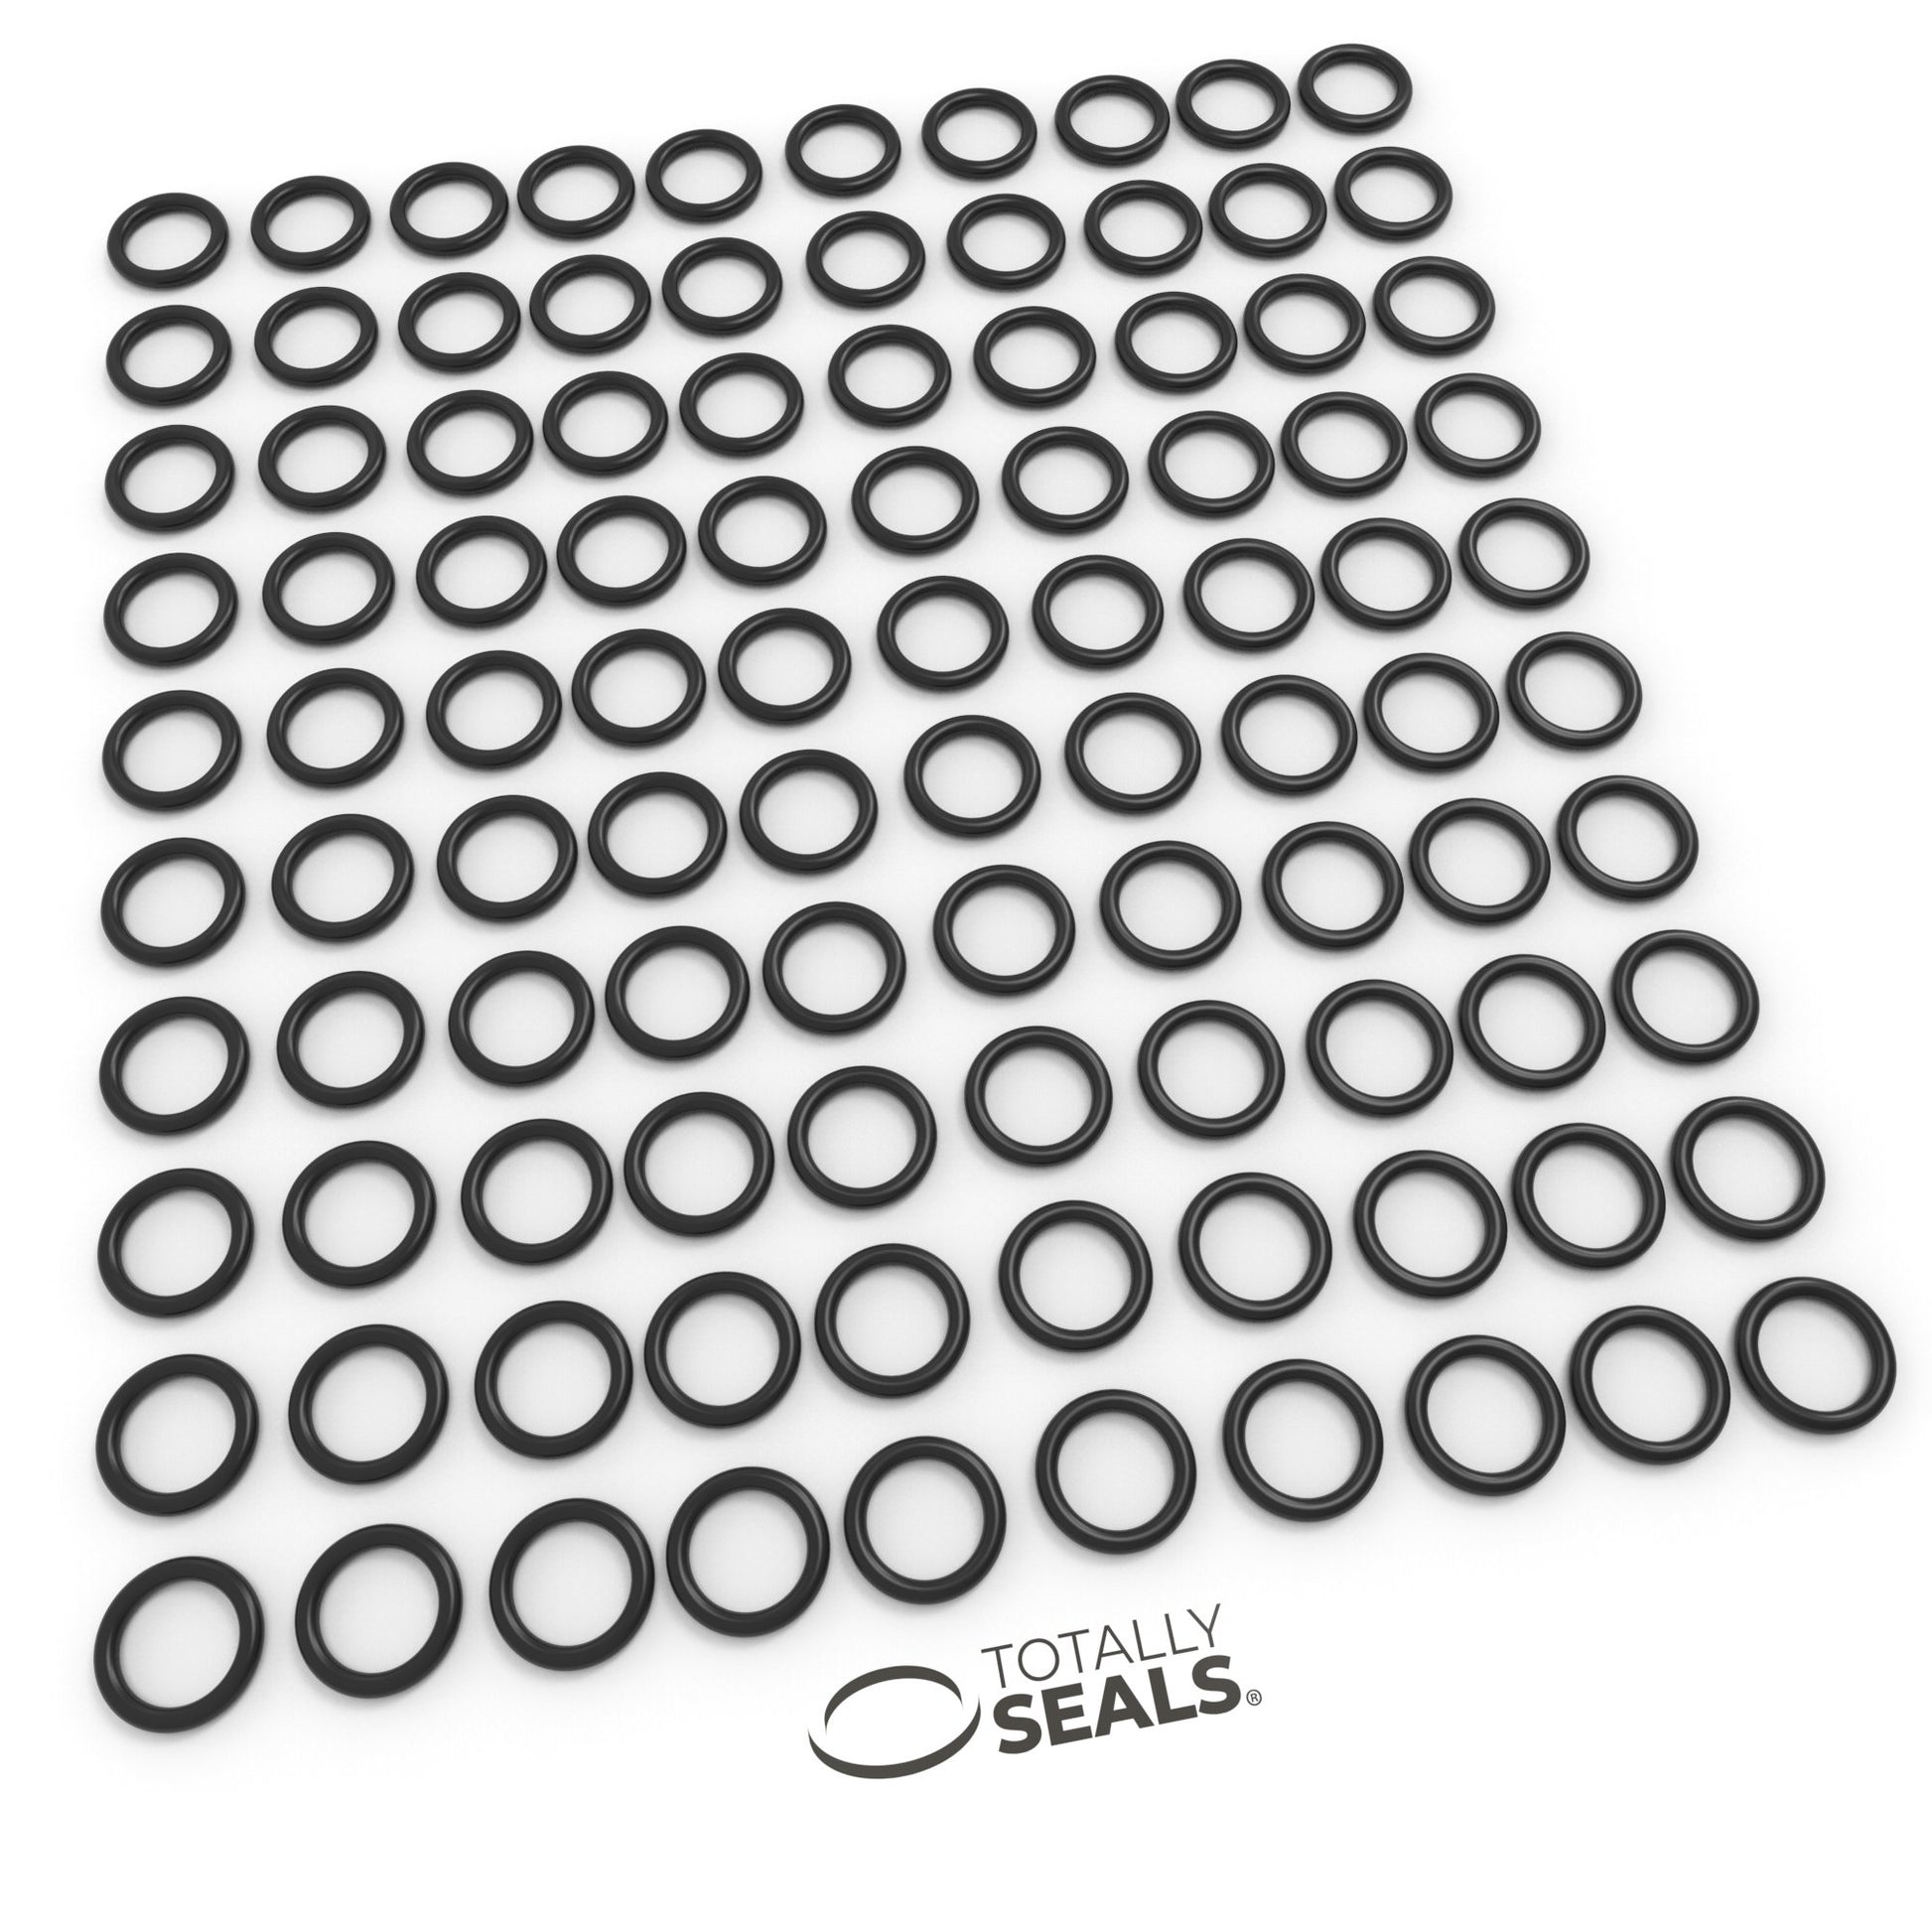 26mm x 2.5mm (31mm OD) Nitrile O-Rings - Totally Seals®